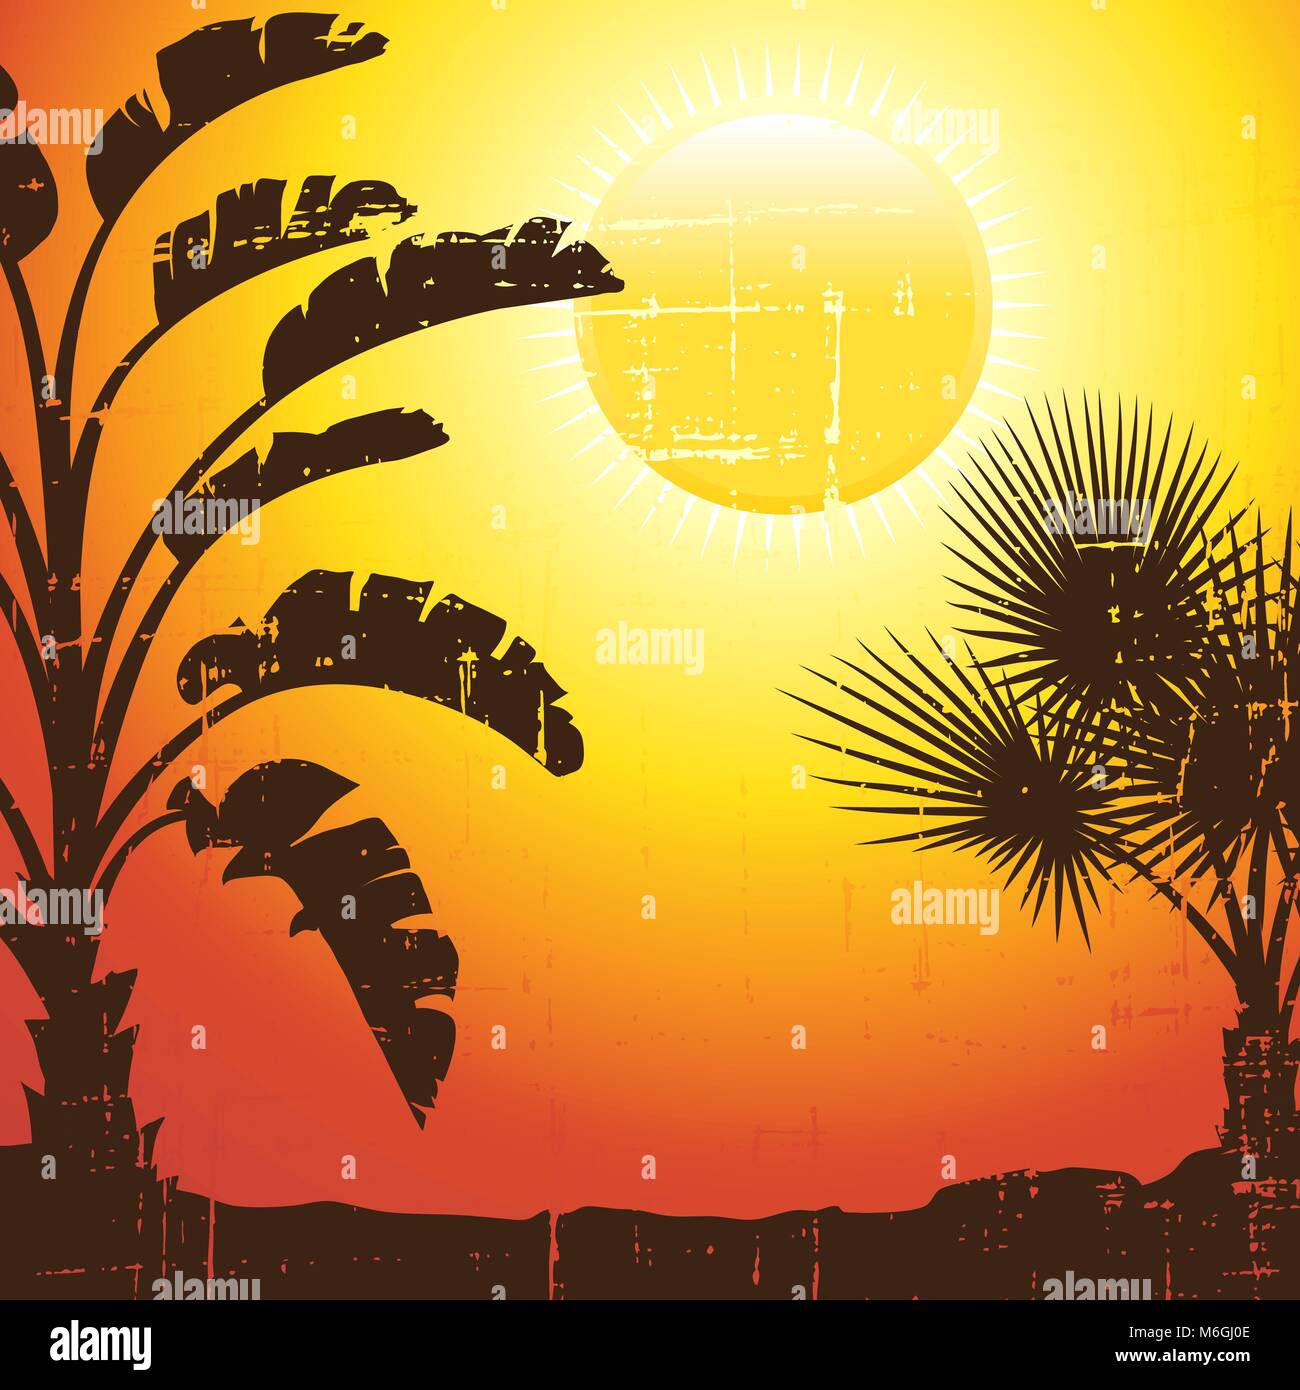 Background with palm trees silhouette at sunset Stock Vector